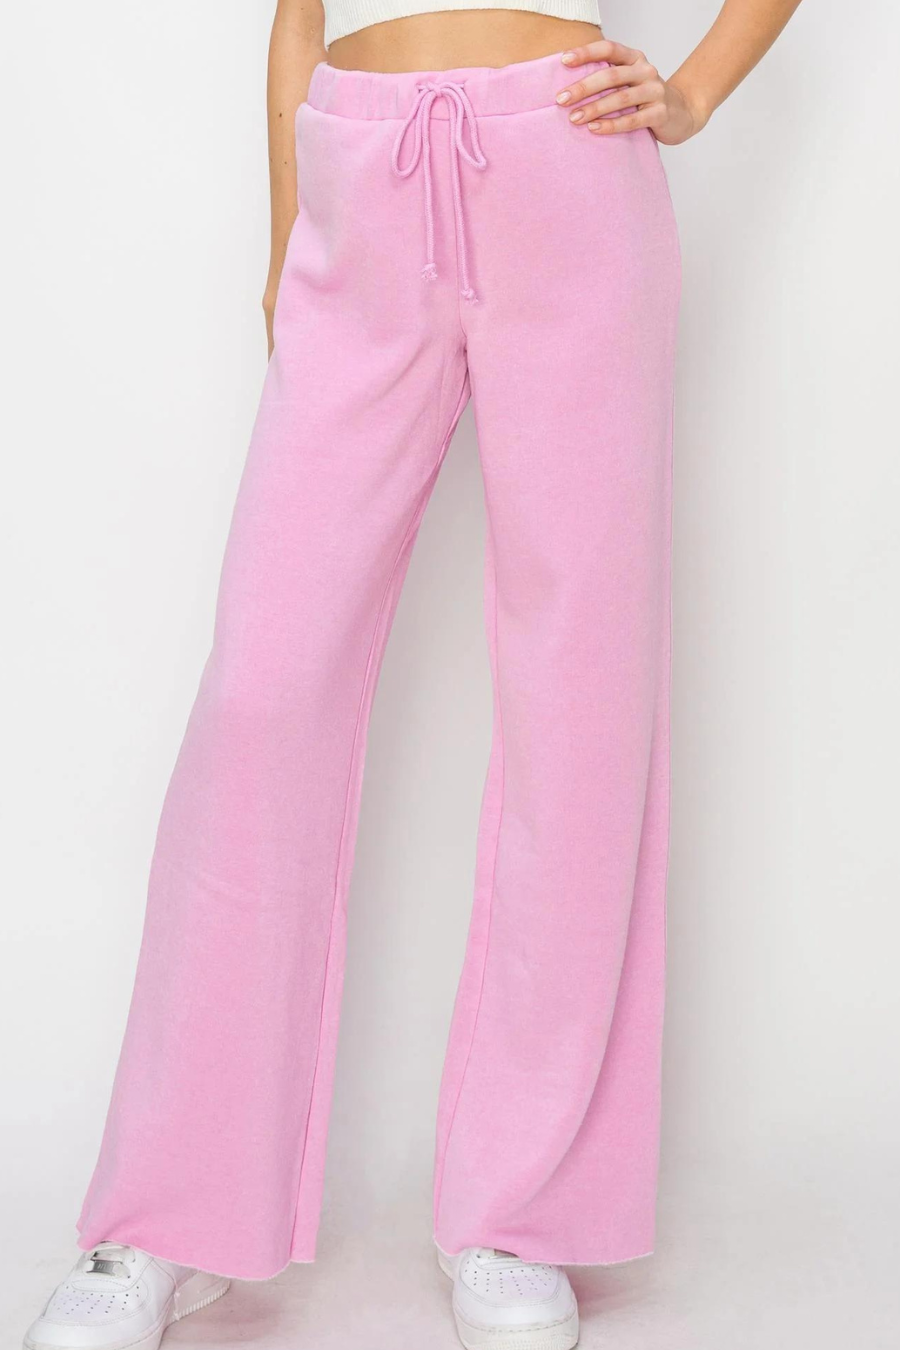 close up of girl wearing pink eve drawstring pants with white tennis shoes 